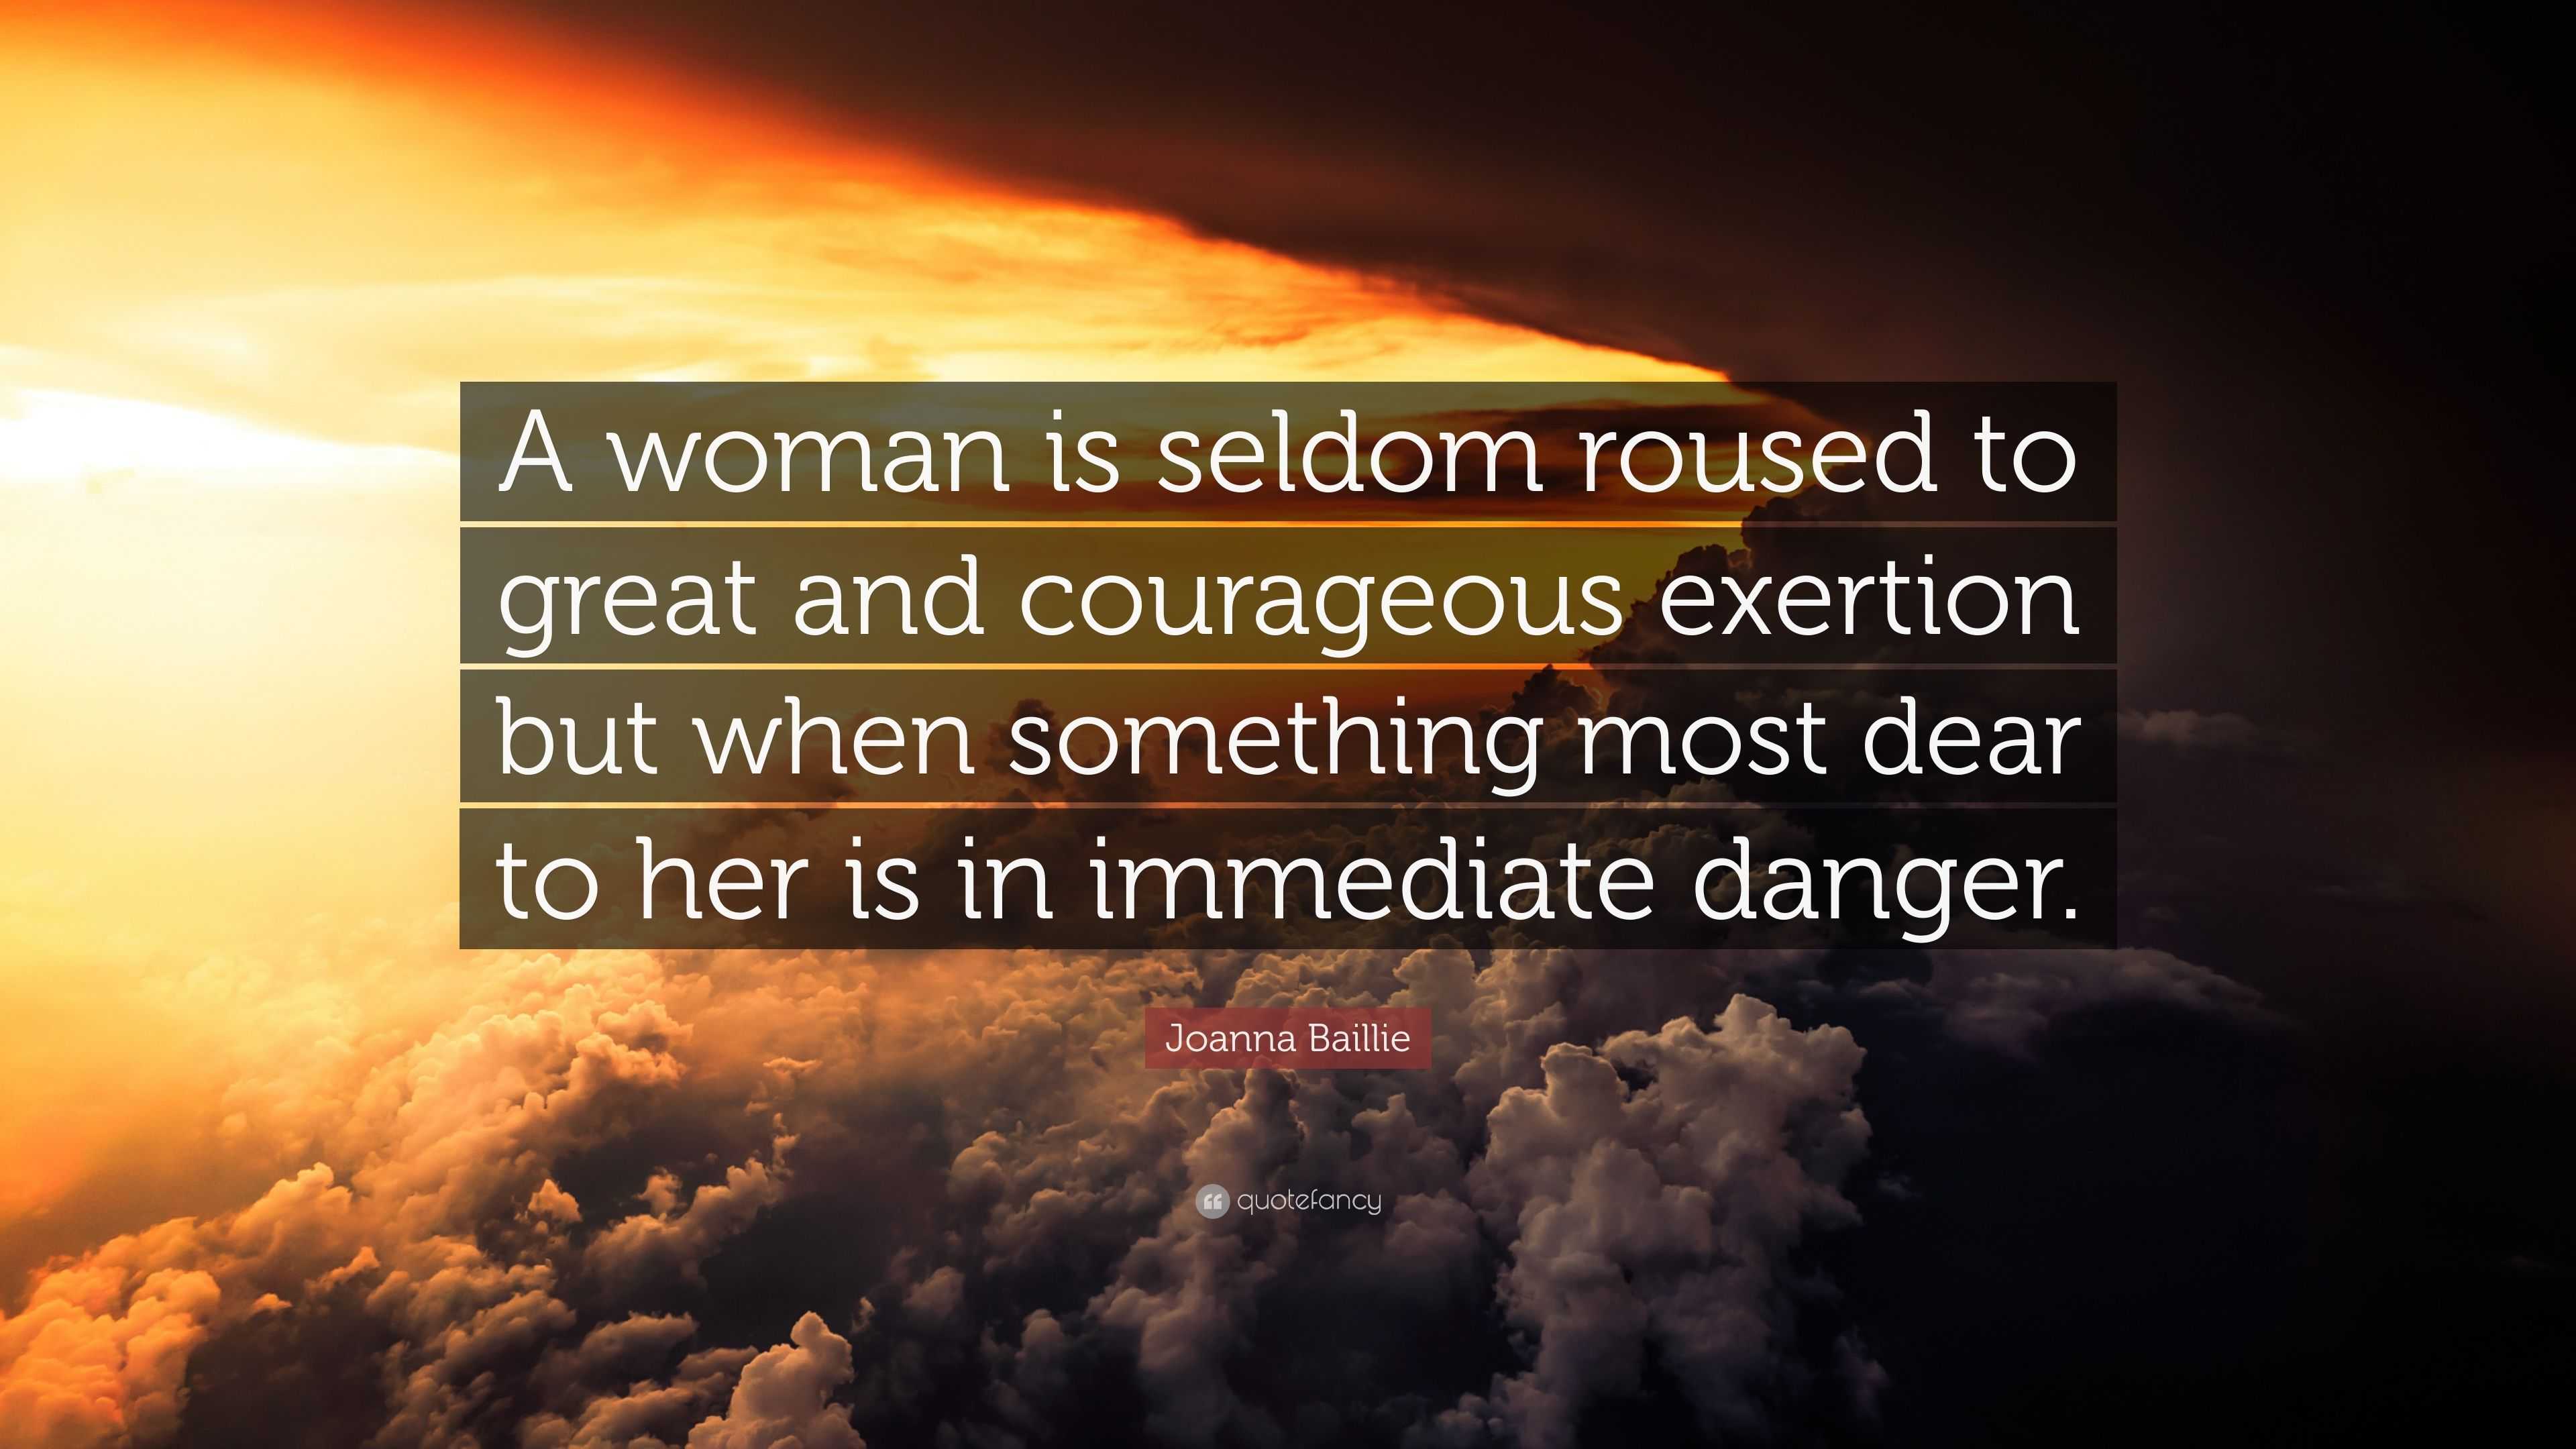 Joanna Baillie Quote: “A woman is seldom roused to great and courageous ...